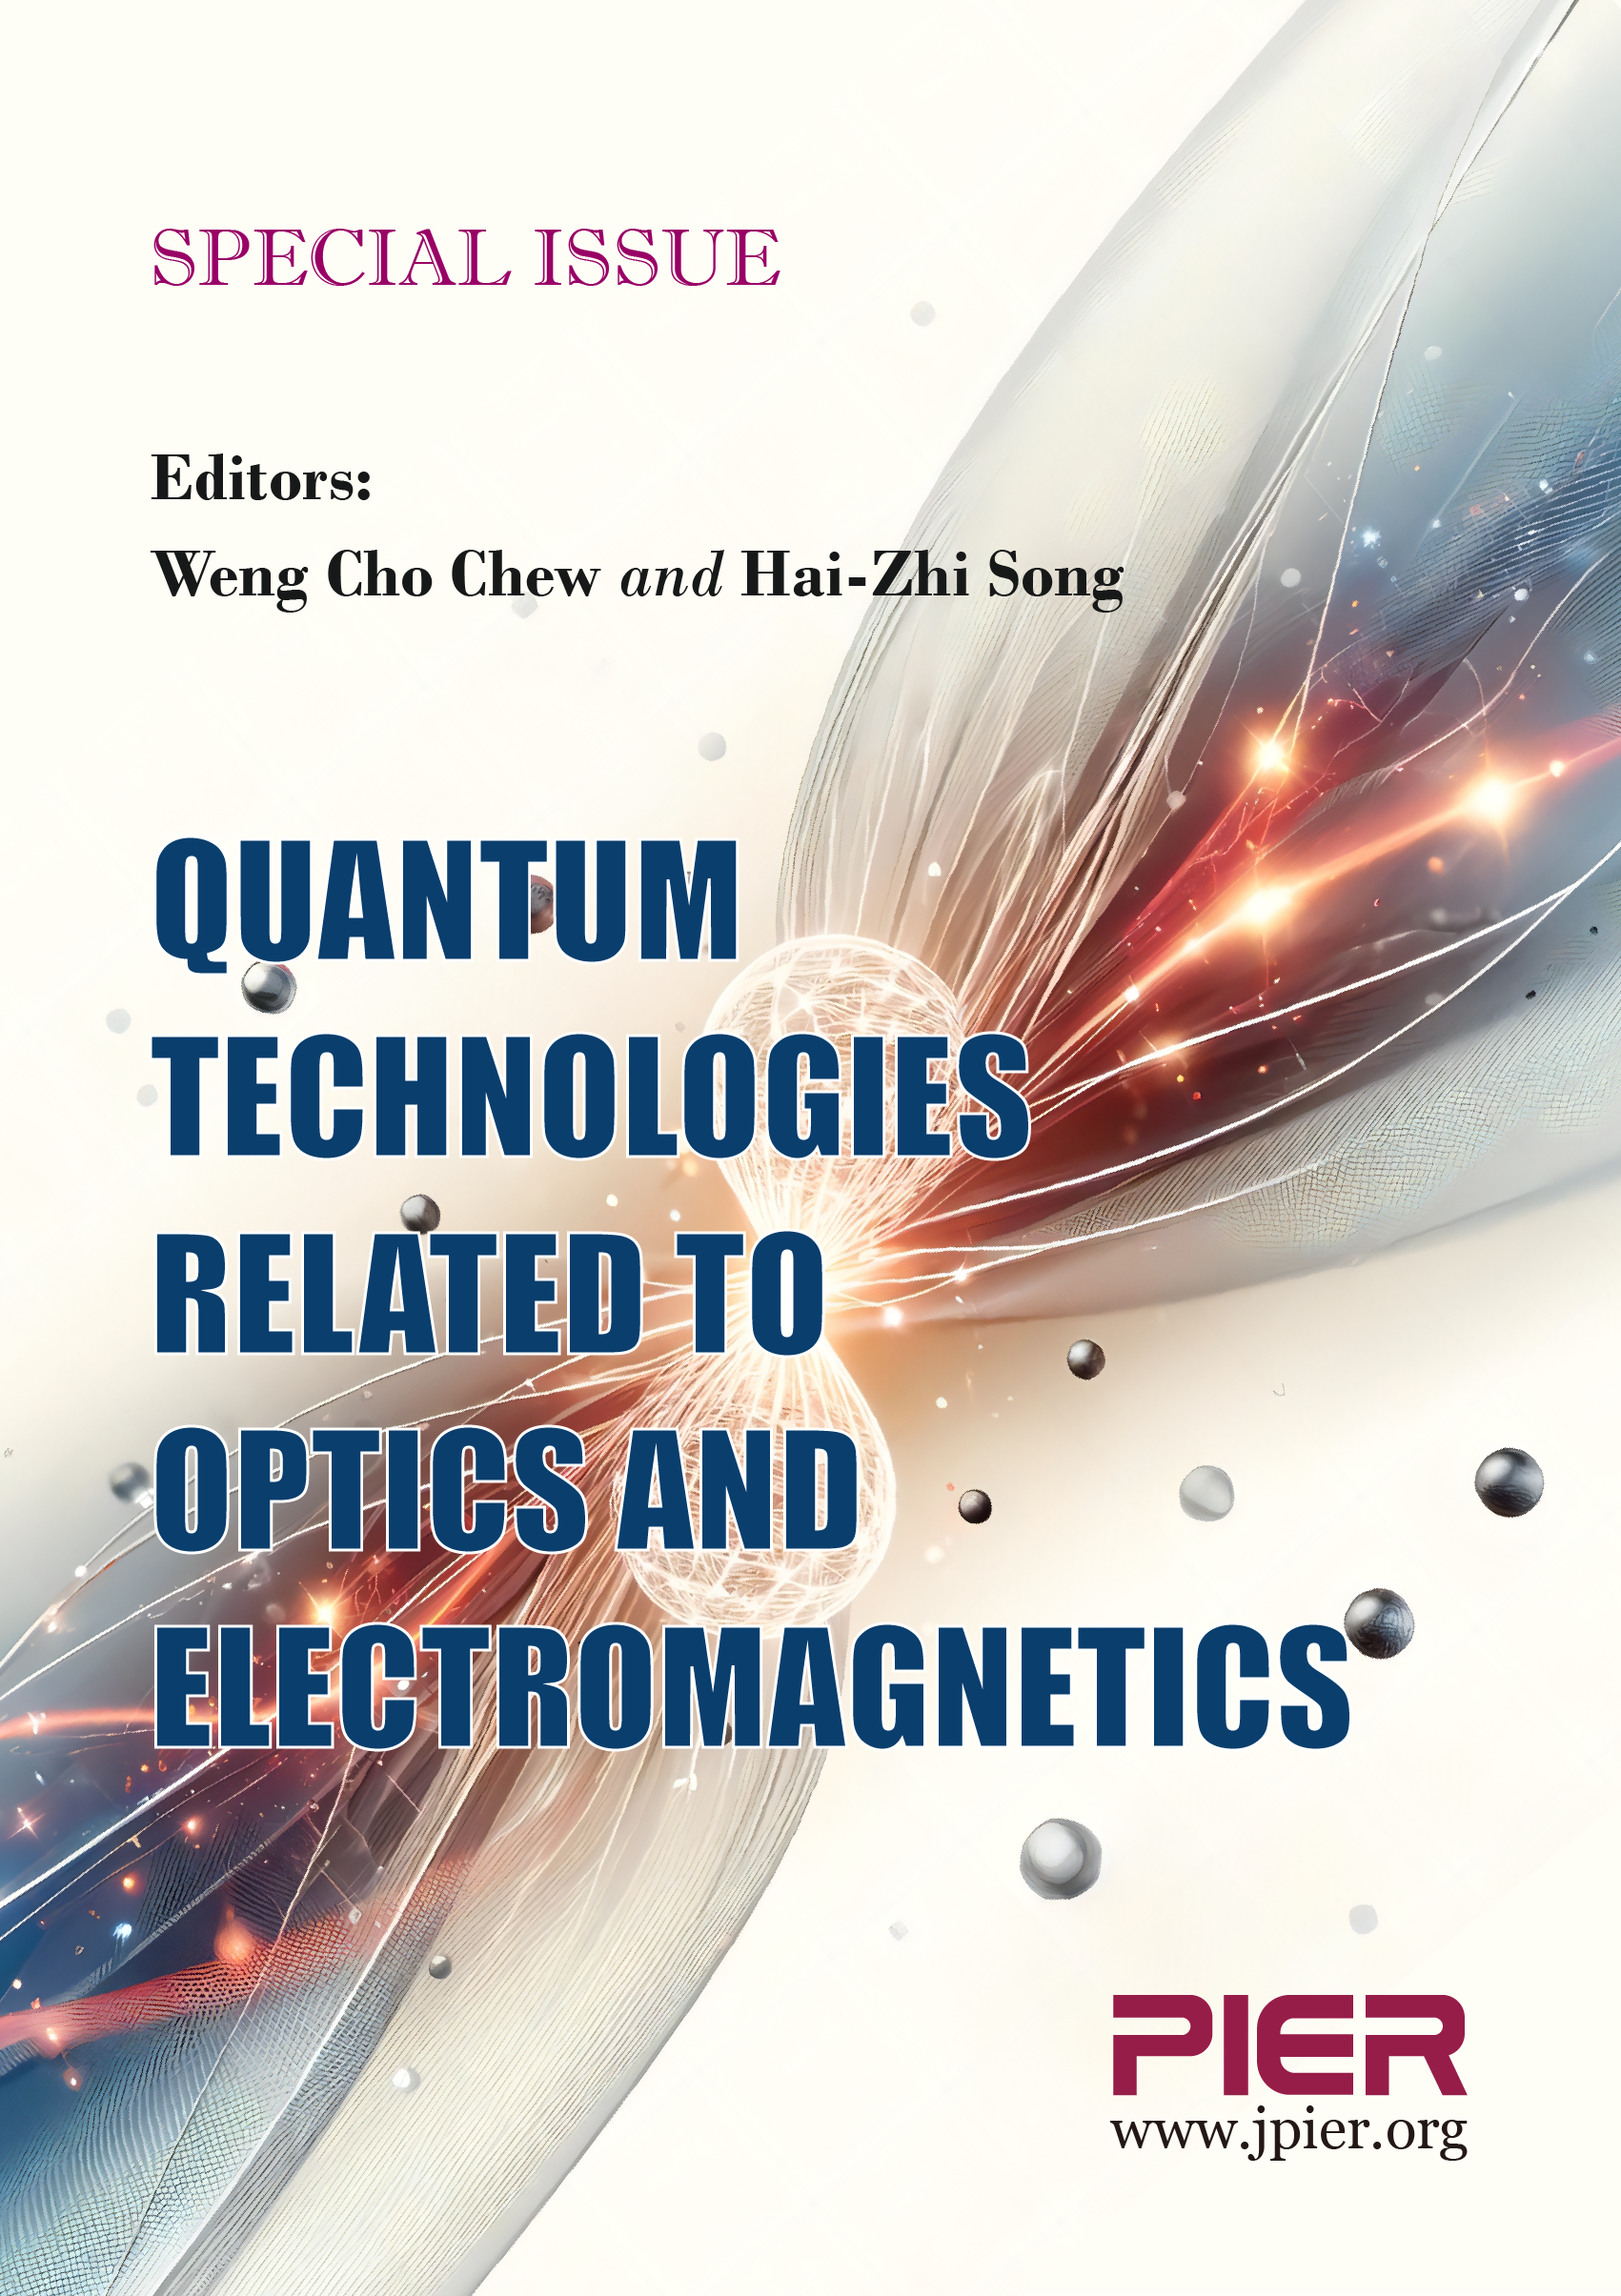 Special Issue: Quantum Technologies Related to Optics and Electromagnetics